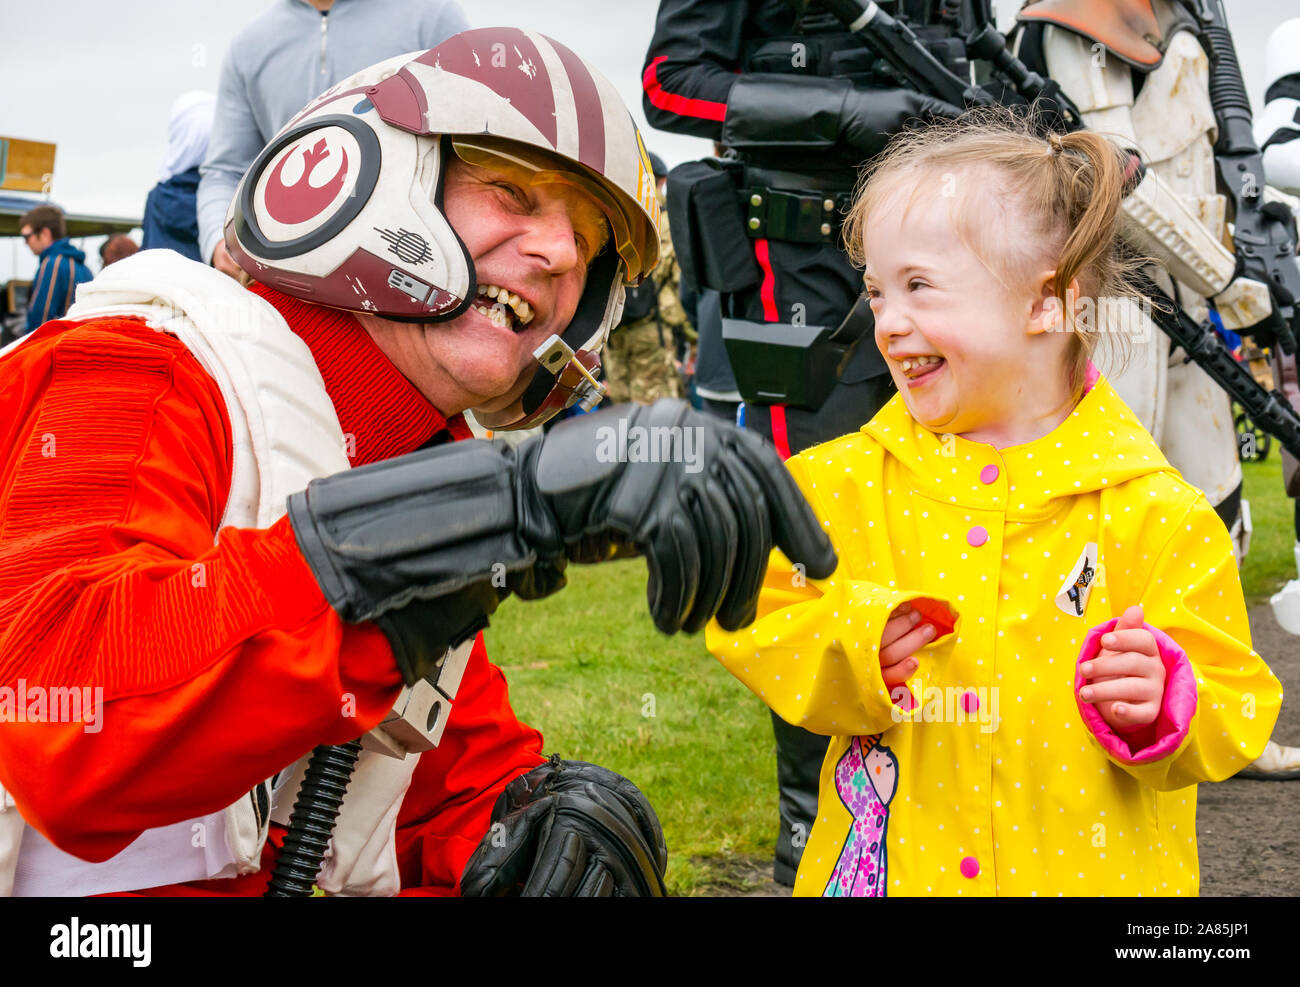 Star Wars character has a laugh with a young girl with Down's Syndrome at National airshow, East Fortune, East Lothian, Scotland, UK Stock Photo